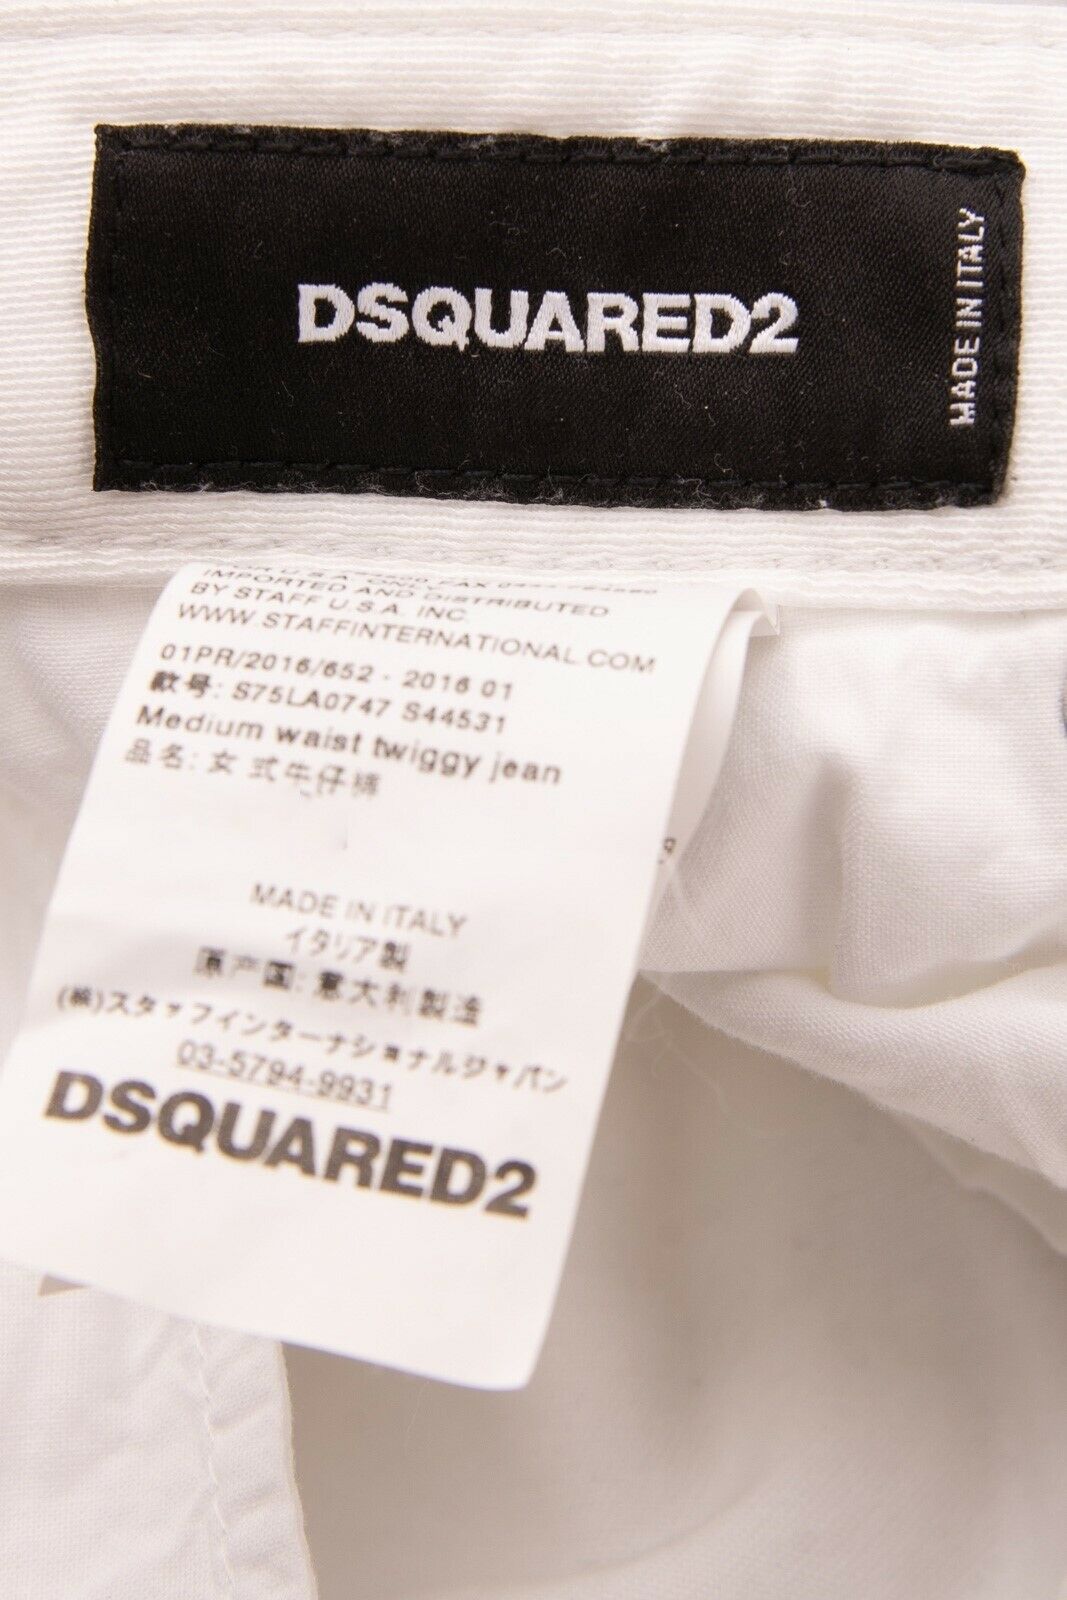 DSQUARED2 Jeans Size XXS Stretch White Zipped Cuffs Made in Italy